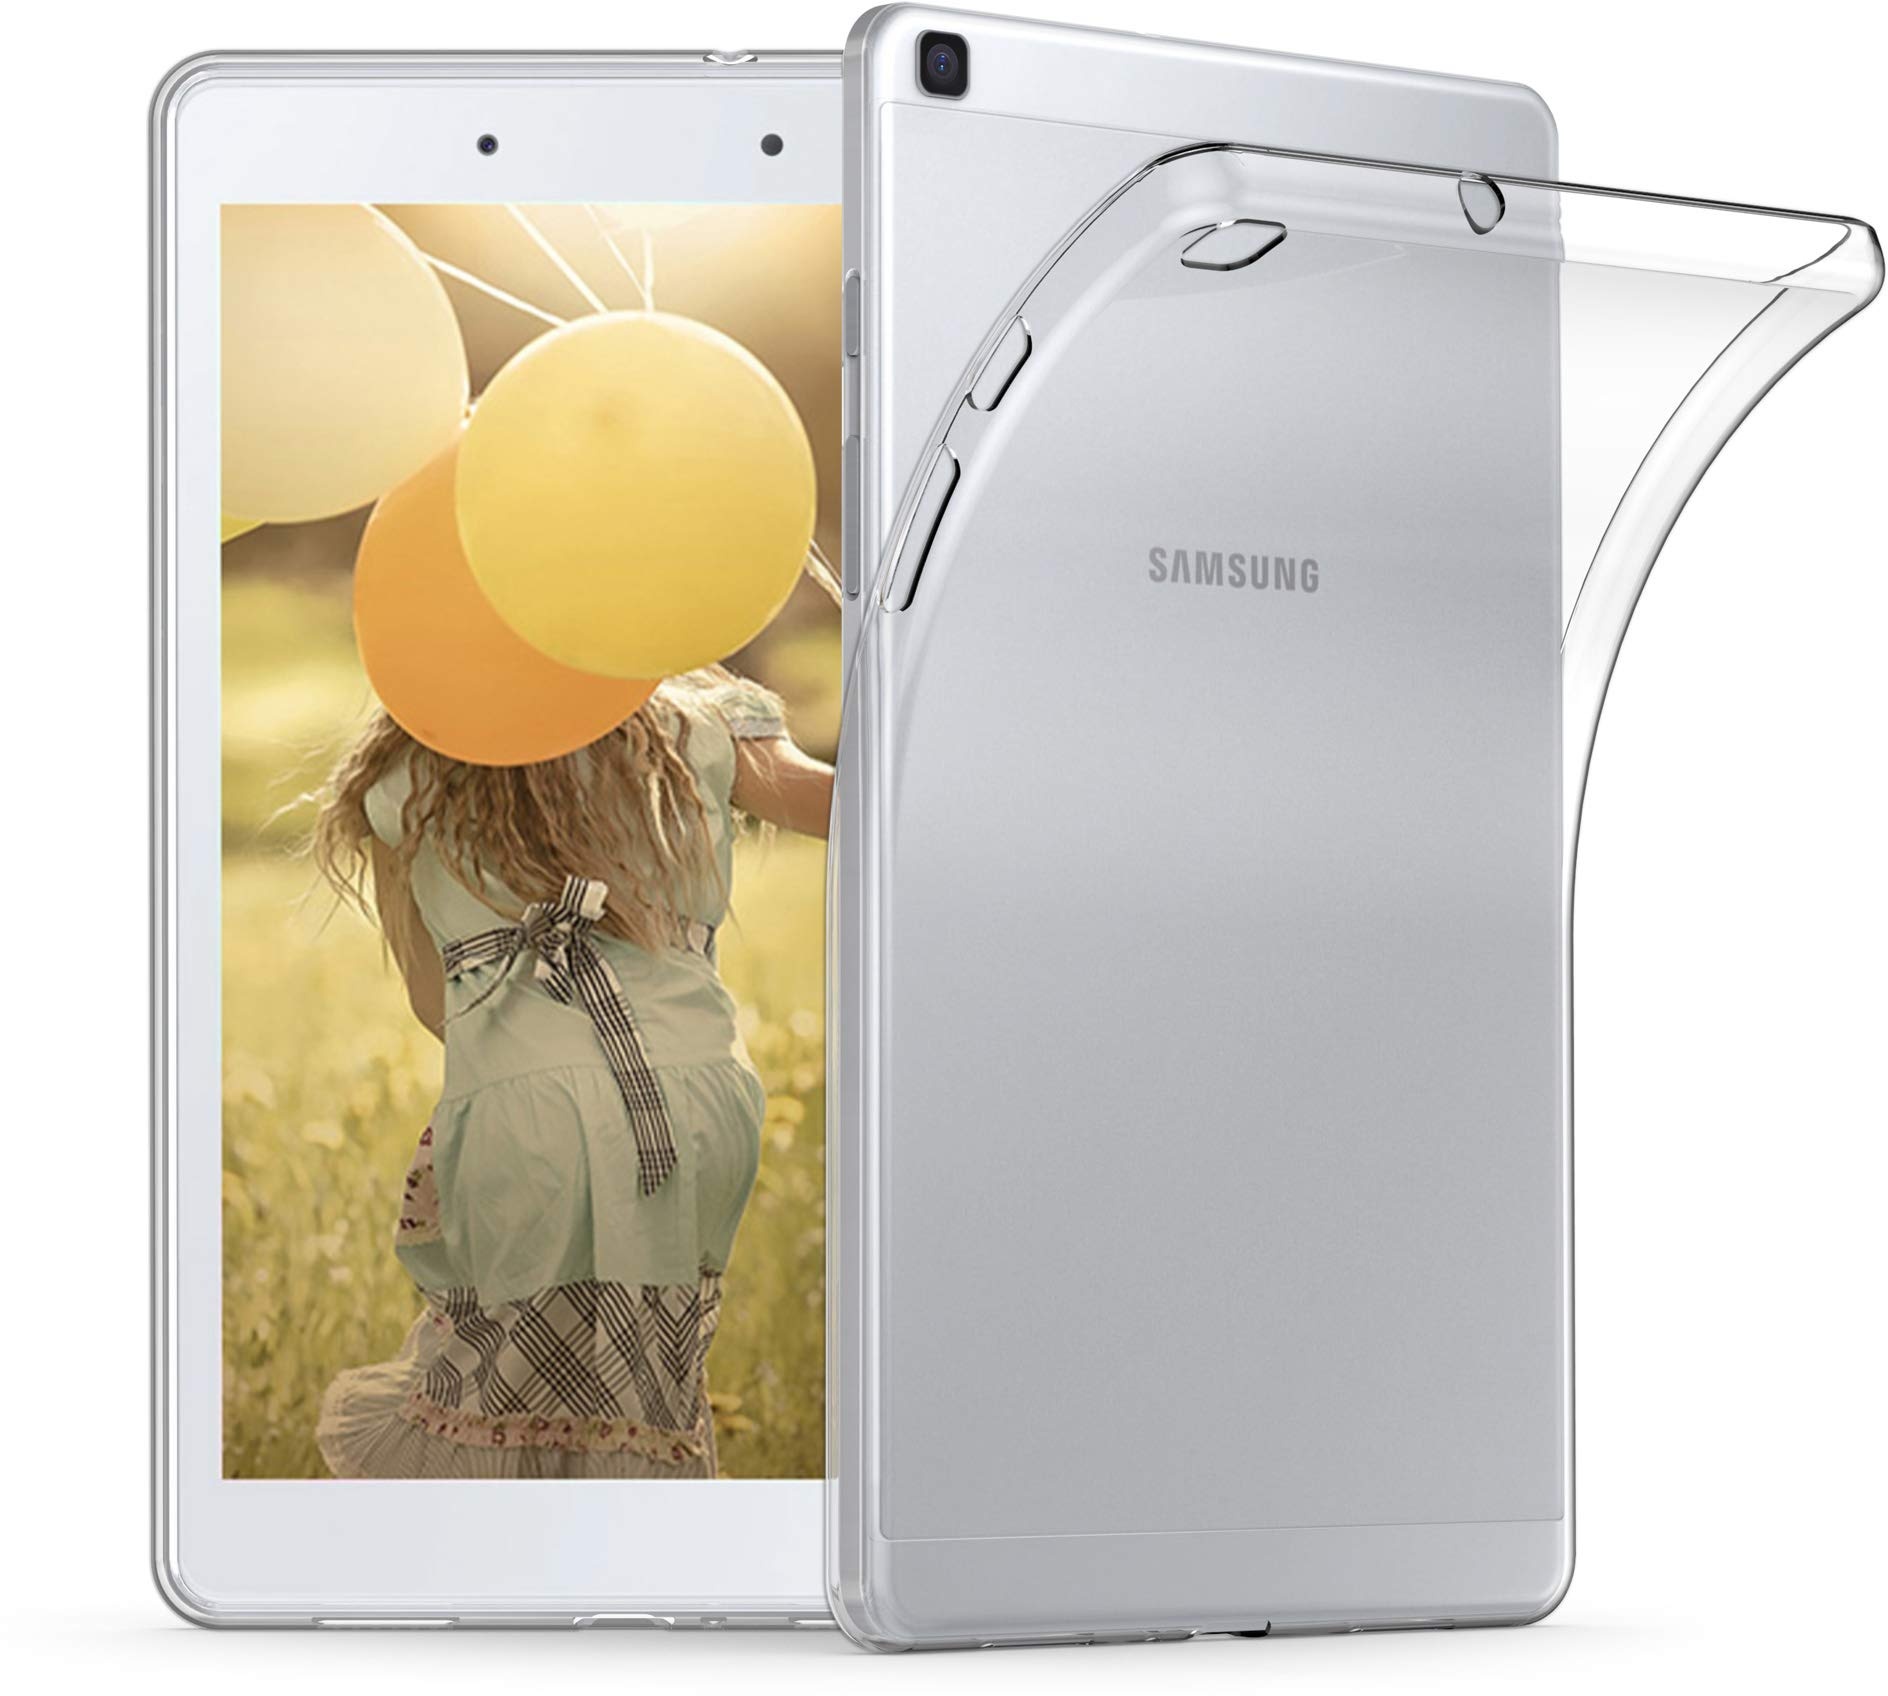 kwmobile Hülle kompatibel mit Samsung Galaxy Tab A 8.0 (2019) Hülle - weiches TPU Silikon Case transparent - Tablet Cover Transparent